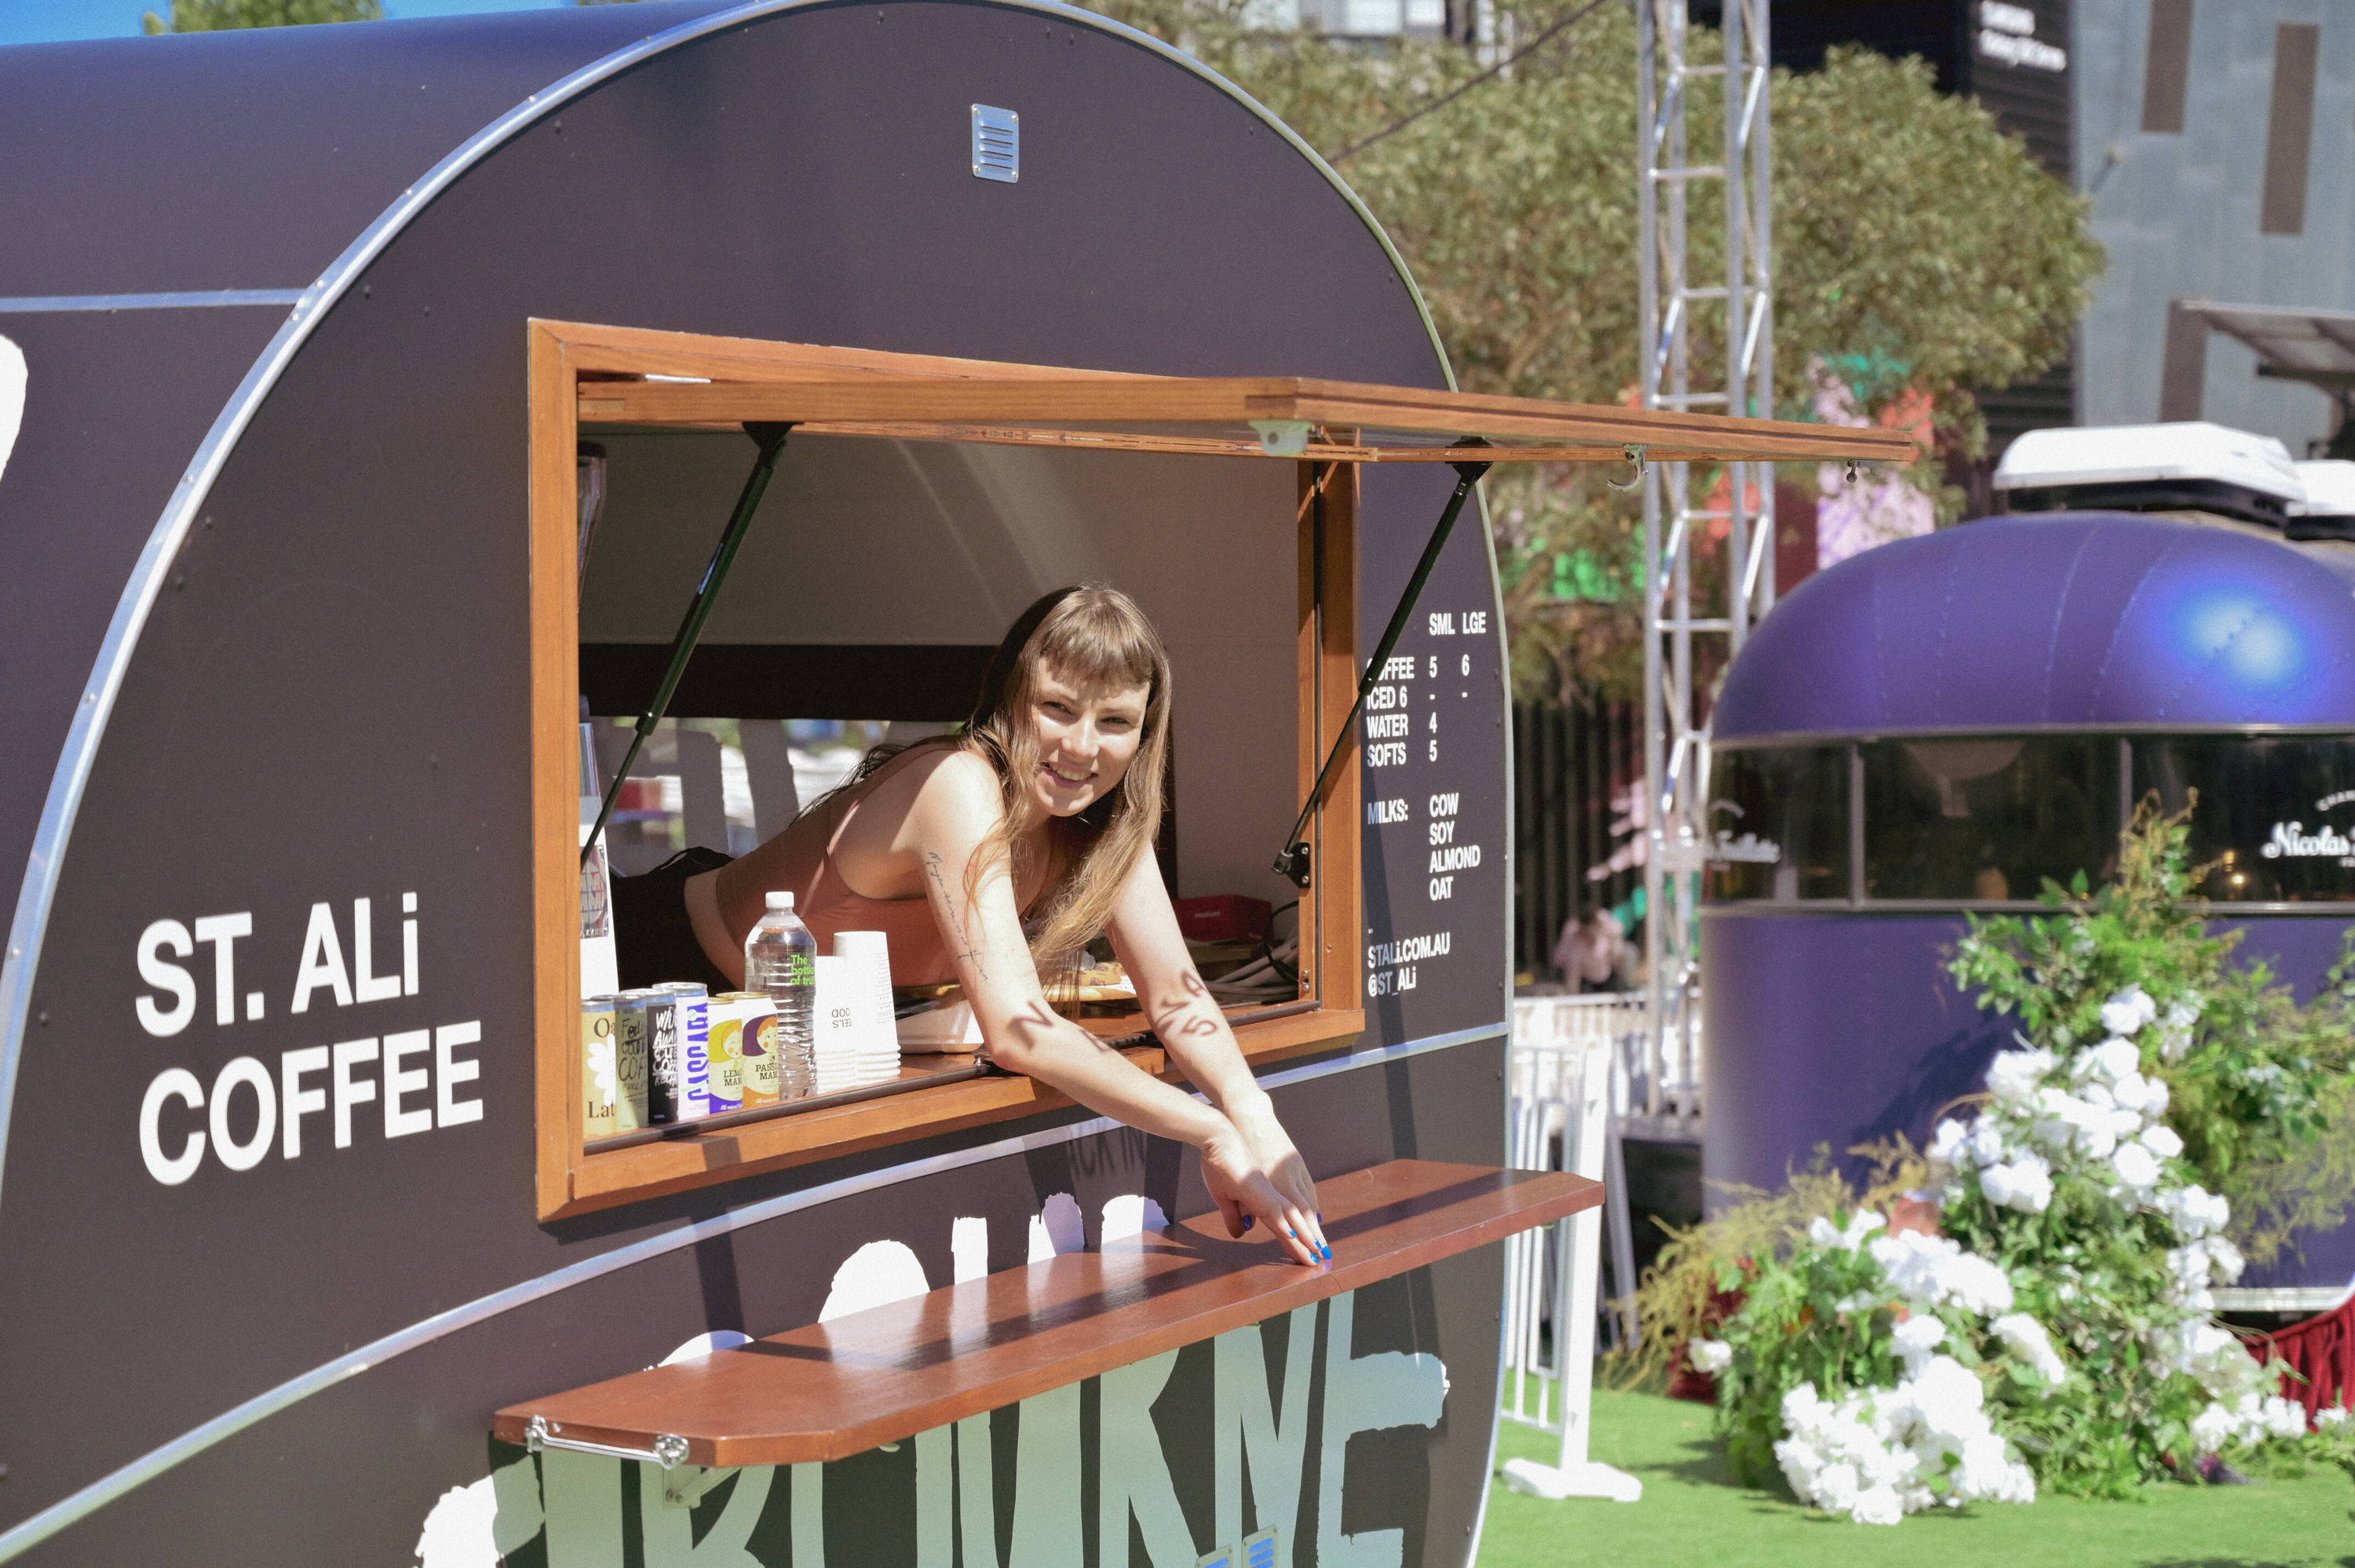 Smiling lady inside a coffee van stall